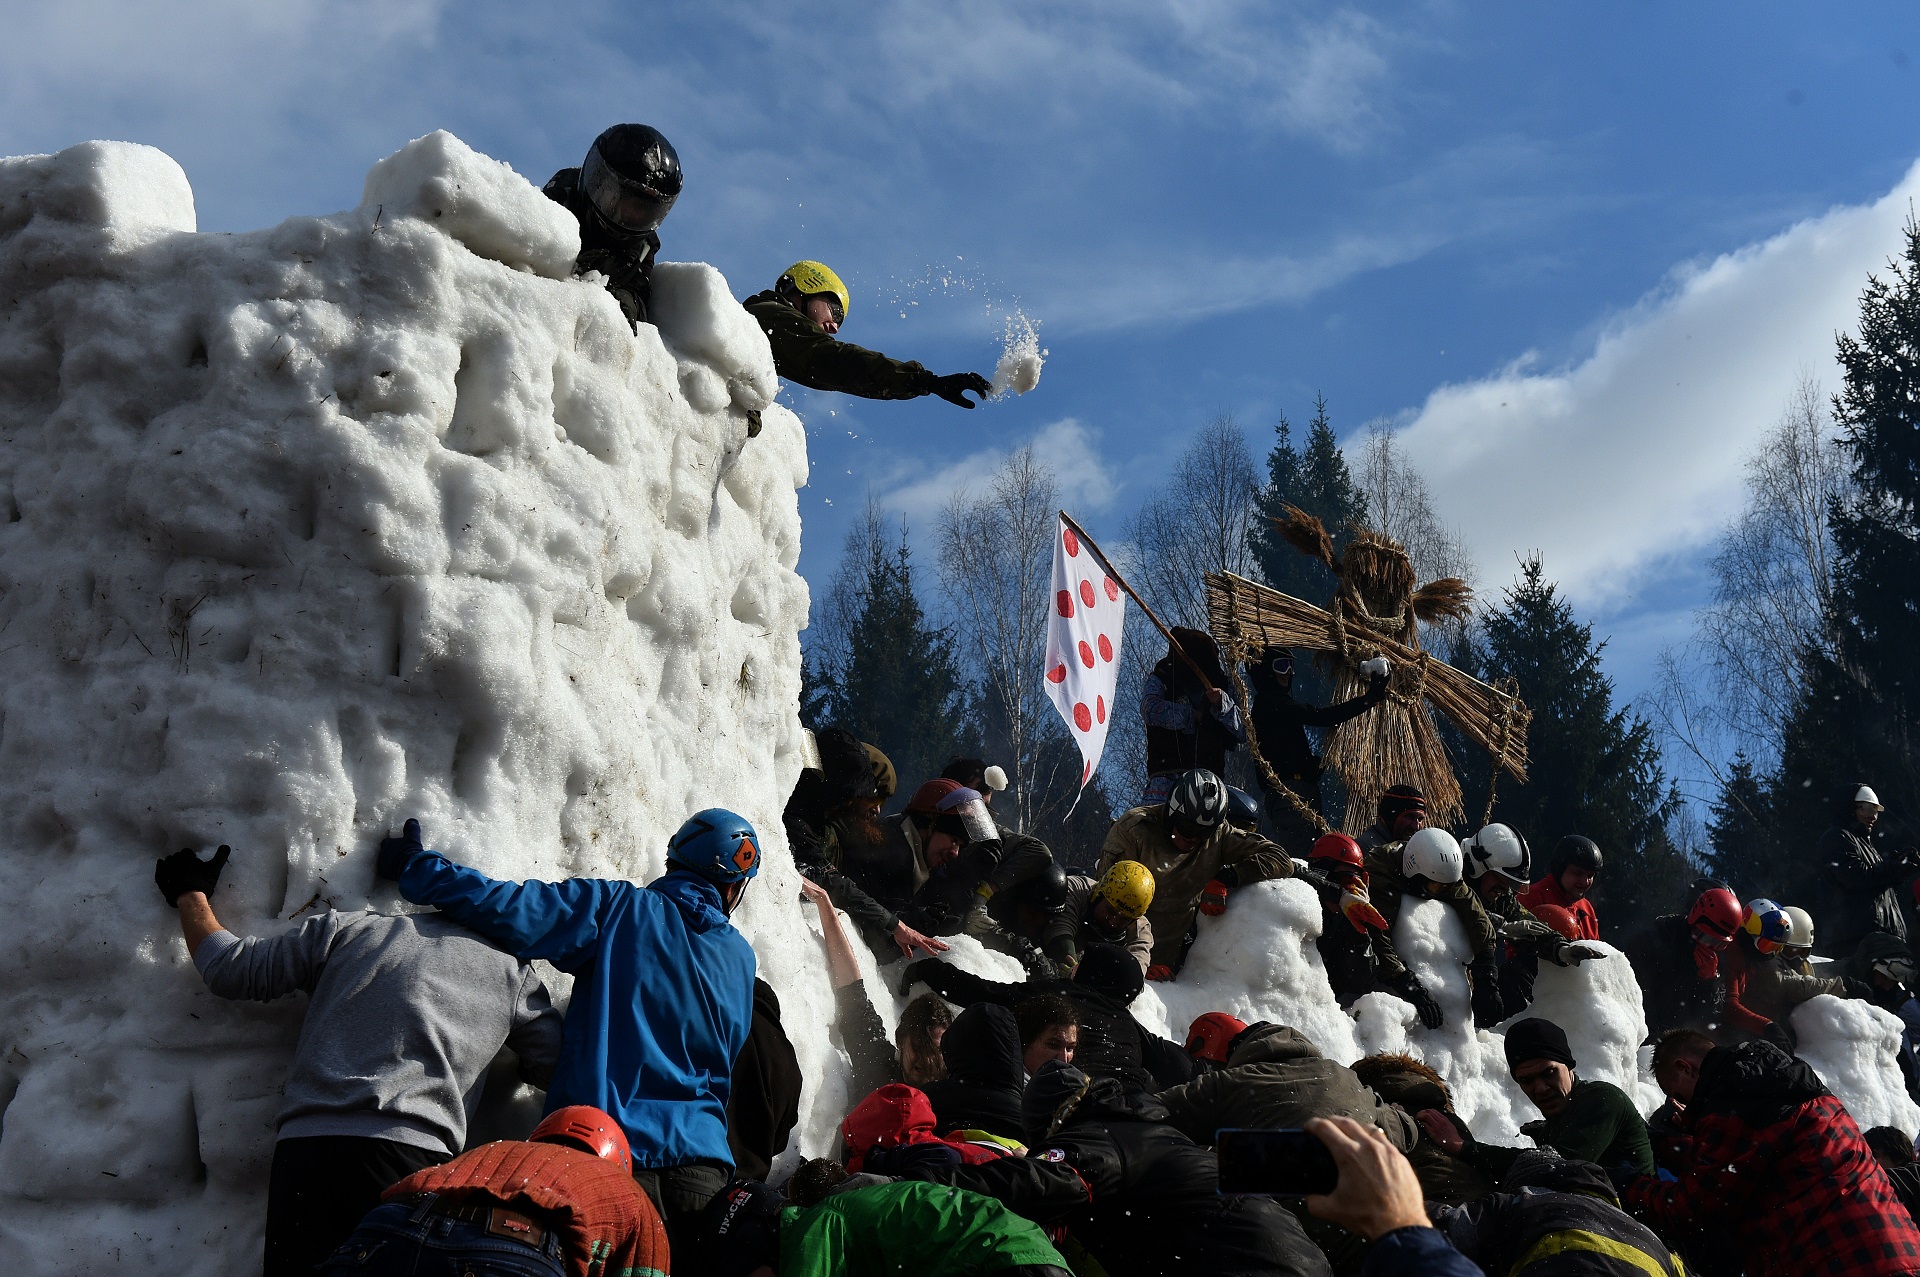 People storm a snow fortress close to the village of Abramtsevo, 60 km north of Moscow on March 13, 2016, in celebration of Maslenitsa (Shrovetide), a farewell ceremony to winter. Shrovetide precedes the beginning of Lent, with each day of the week holding its own meaning. Shrove Sunday, also known as the Sunday of Forgiveness, is a day for asking forgiveness for the harm caused to other people intentionally or unintentionally. / AFP PHOTO / VASILY MAXIMOV